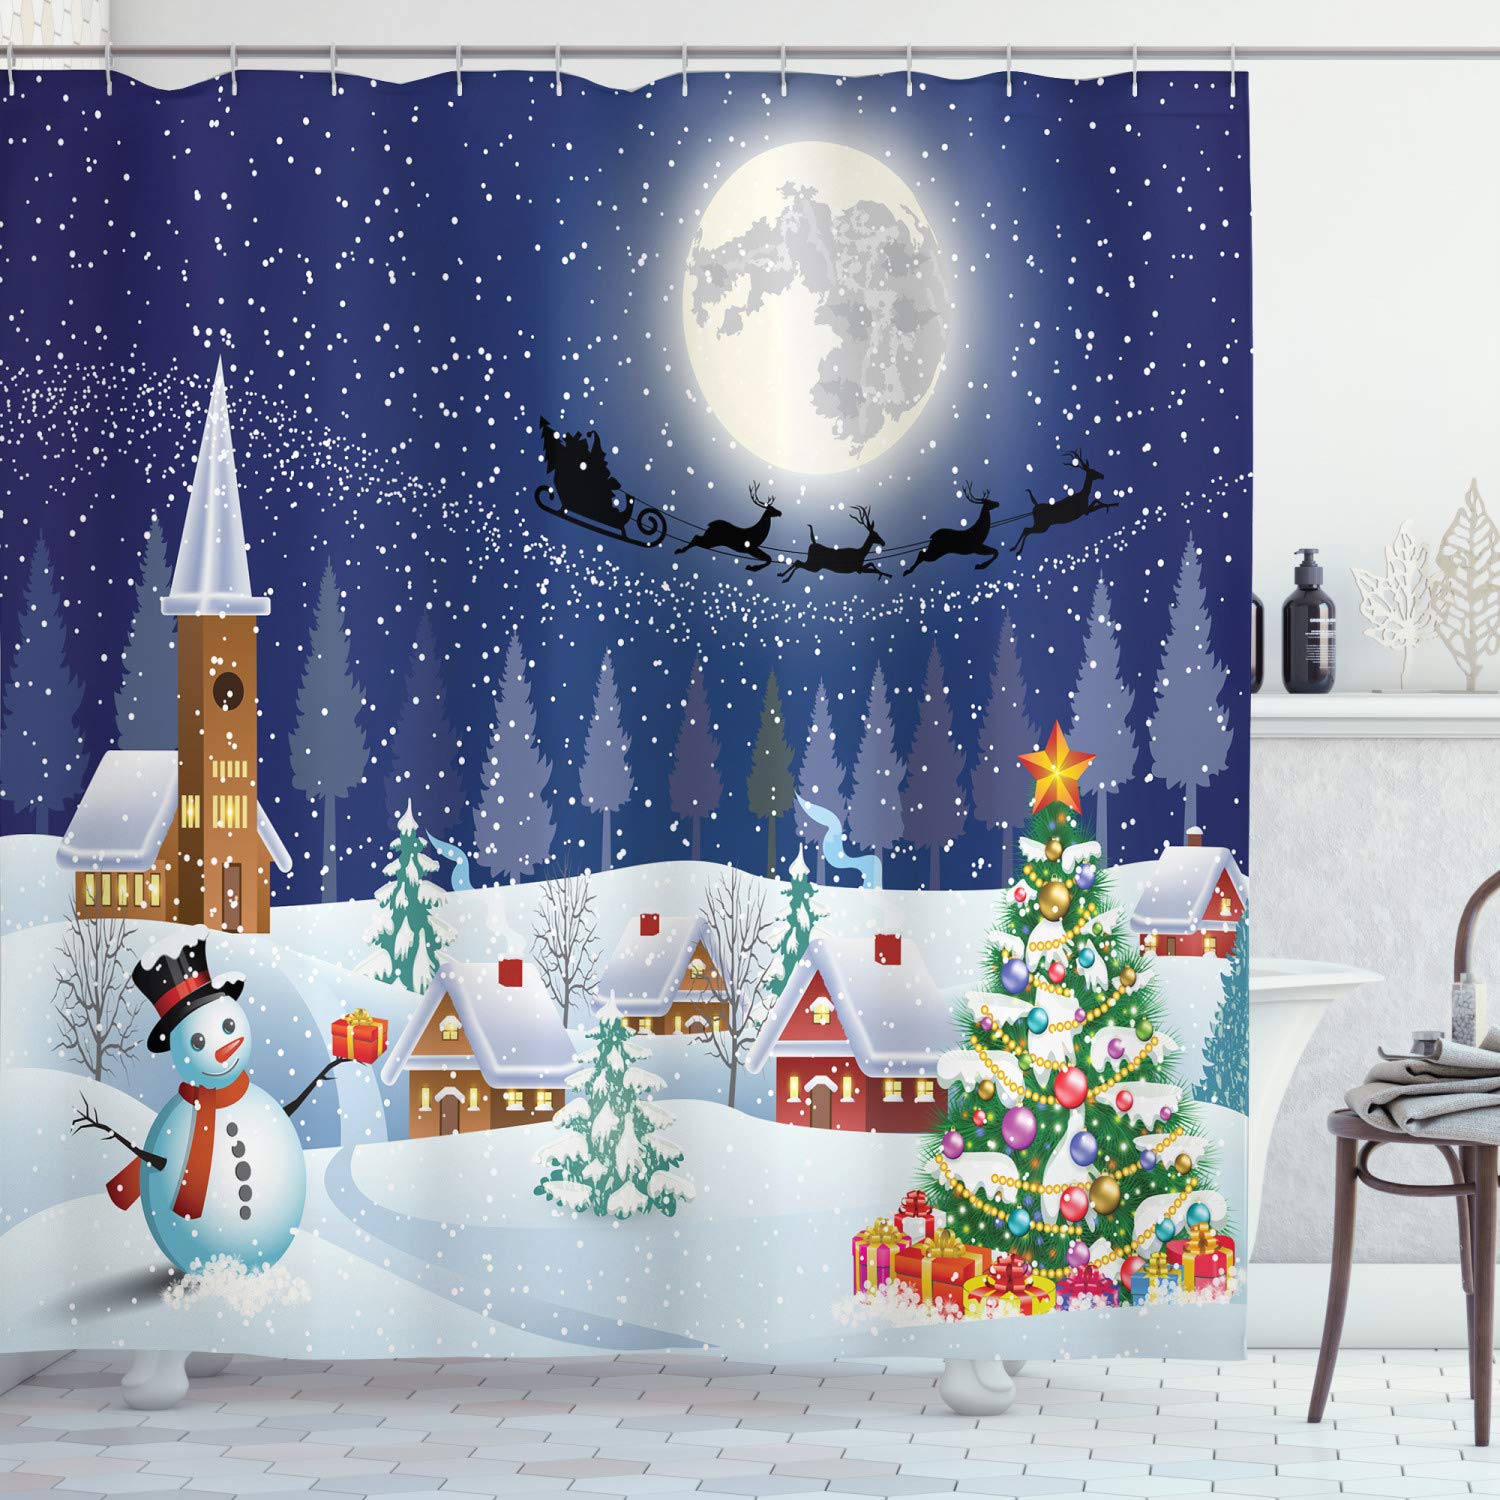 Ambesonne Christmas Decorations Collection, Christmas Eve in Small Town with Snowman on Starry Night Winter Wonderland Scene, Polyester Fabric Bathroom Shower Curtain Set with Hooks, Blue White